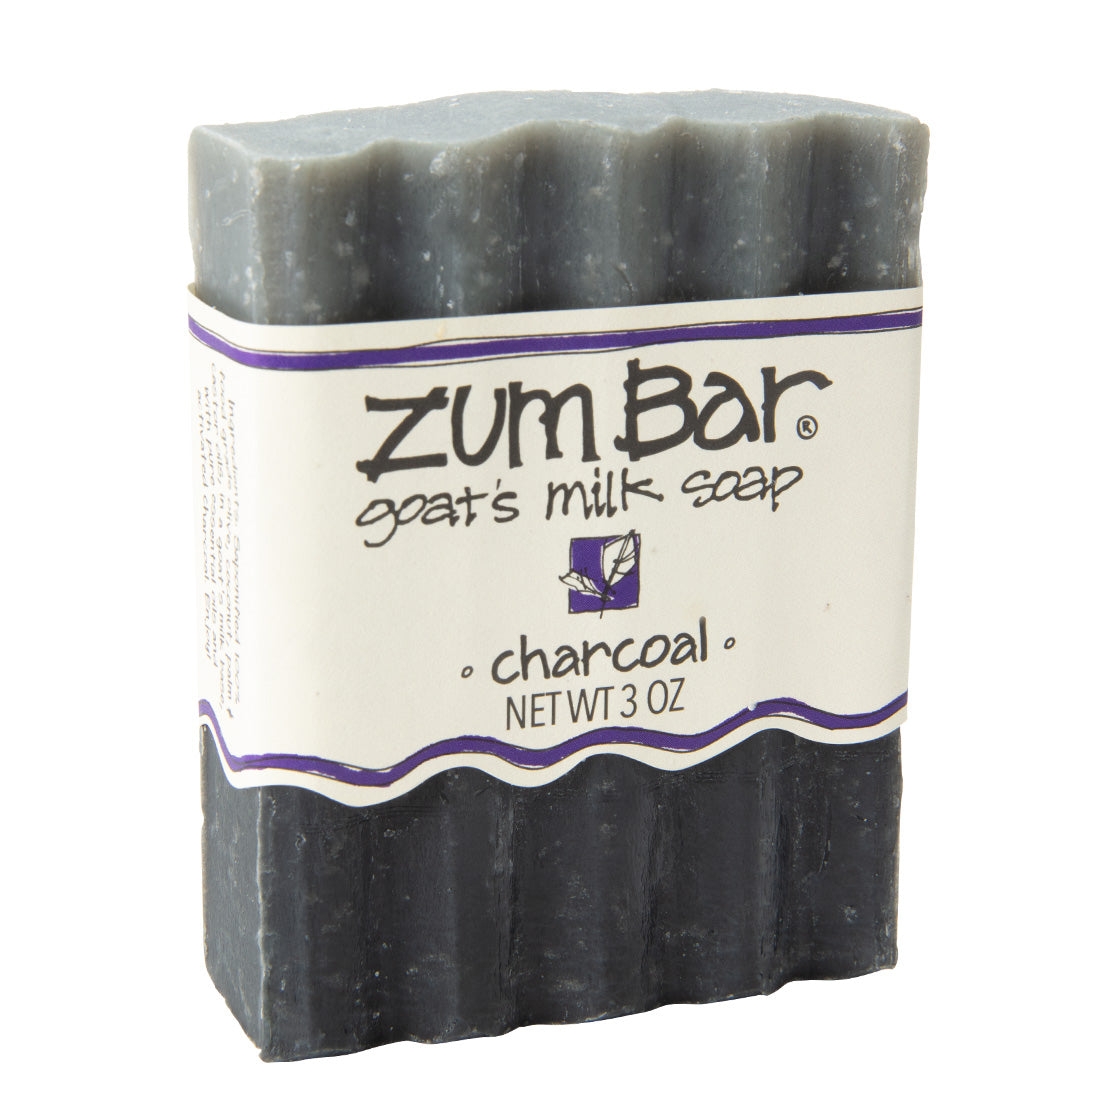 Labeled Charcoal Zum Bar Soap with grey and black coloring.